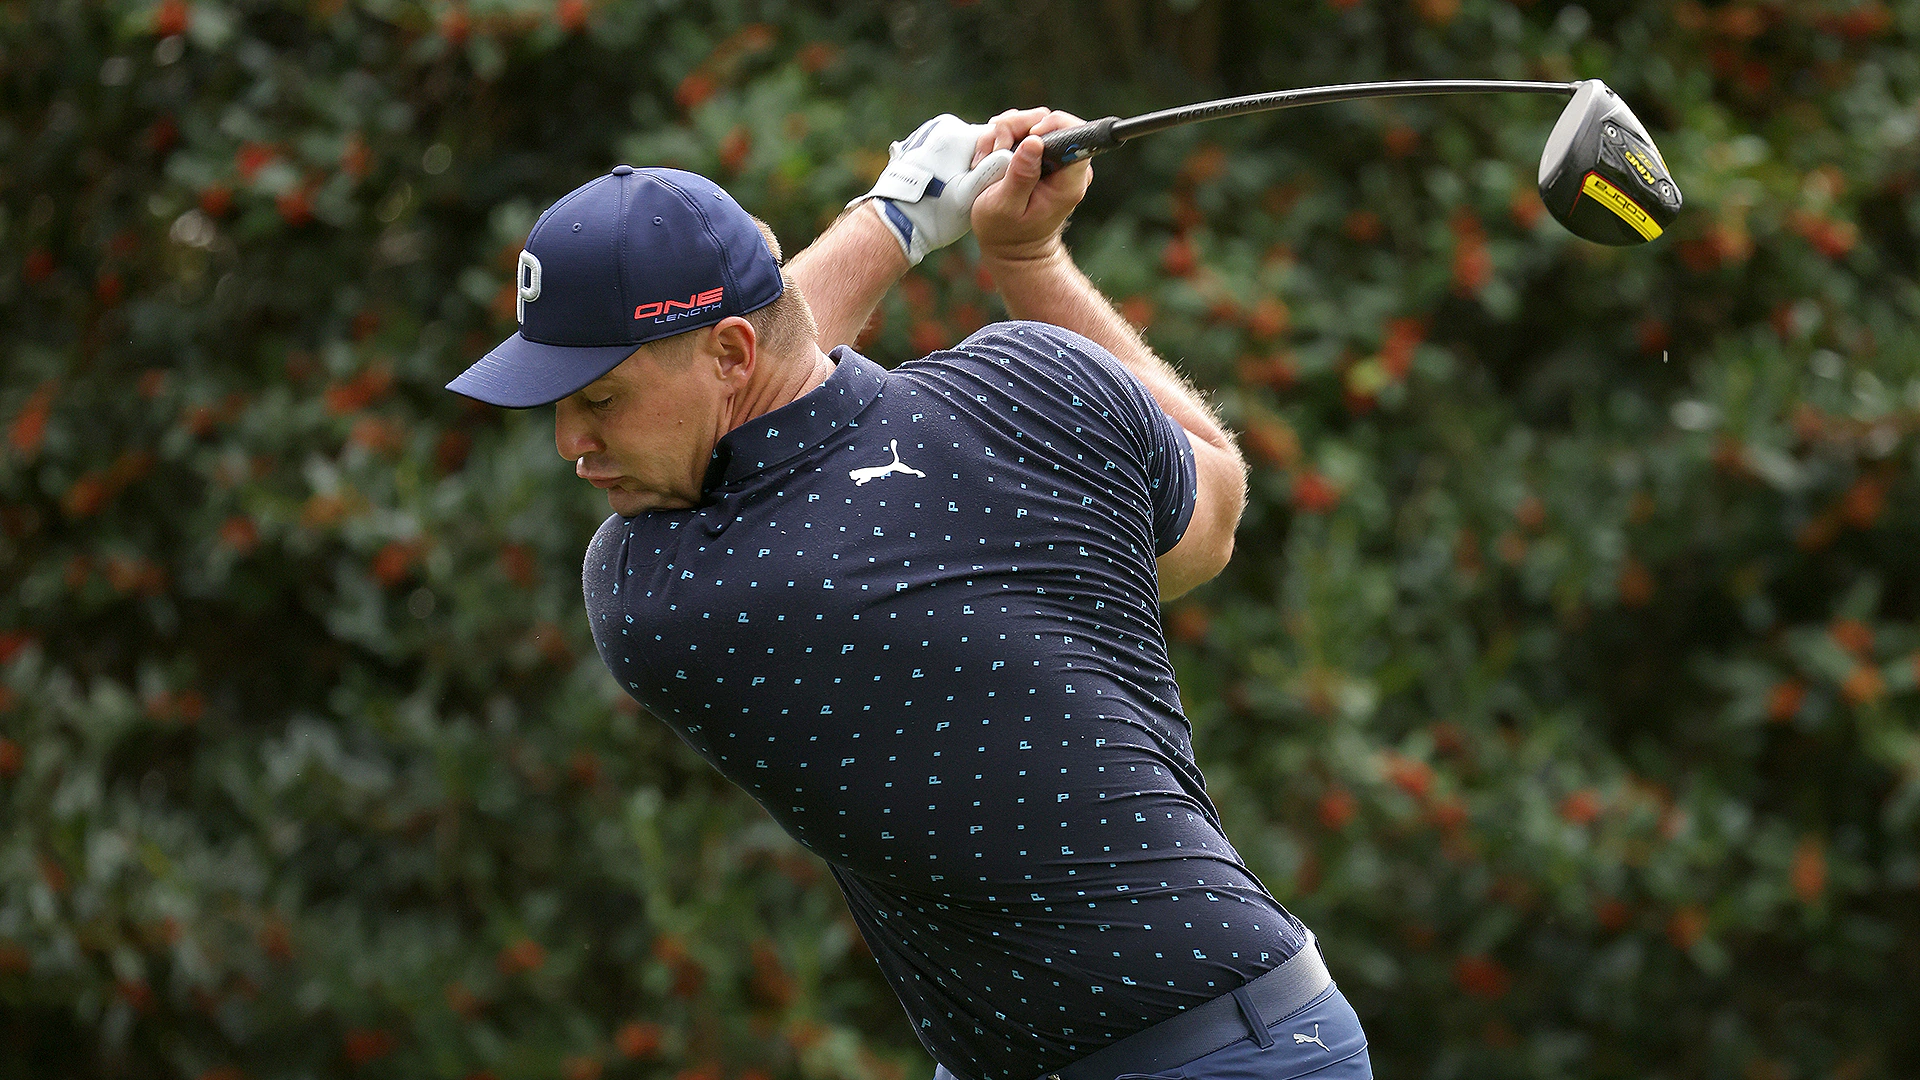 On eve of Masters, Bryson DeChambeau still tinkering with 48-inch driver 2